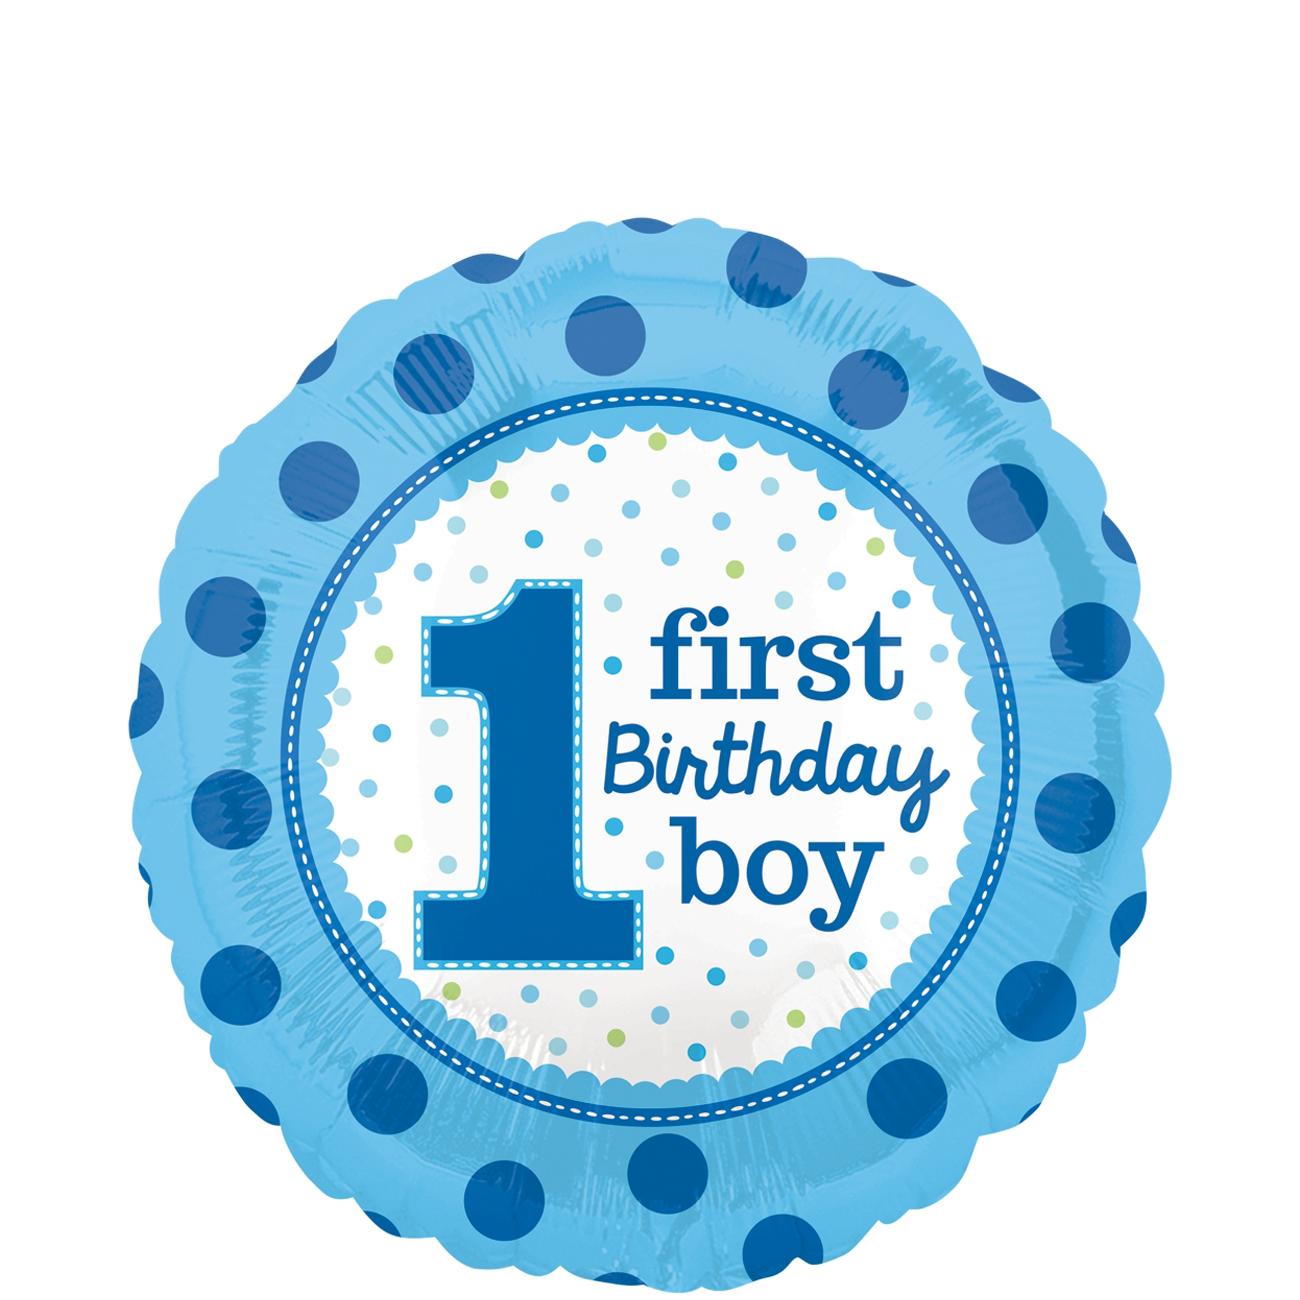 1st Birthday Boy Foil Balloon 45cm Balloons & Streamers - Party Centre